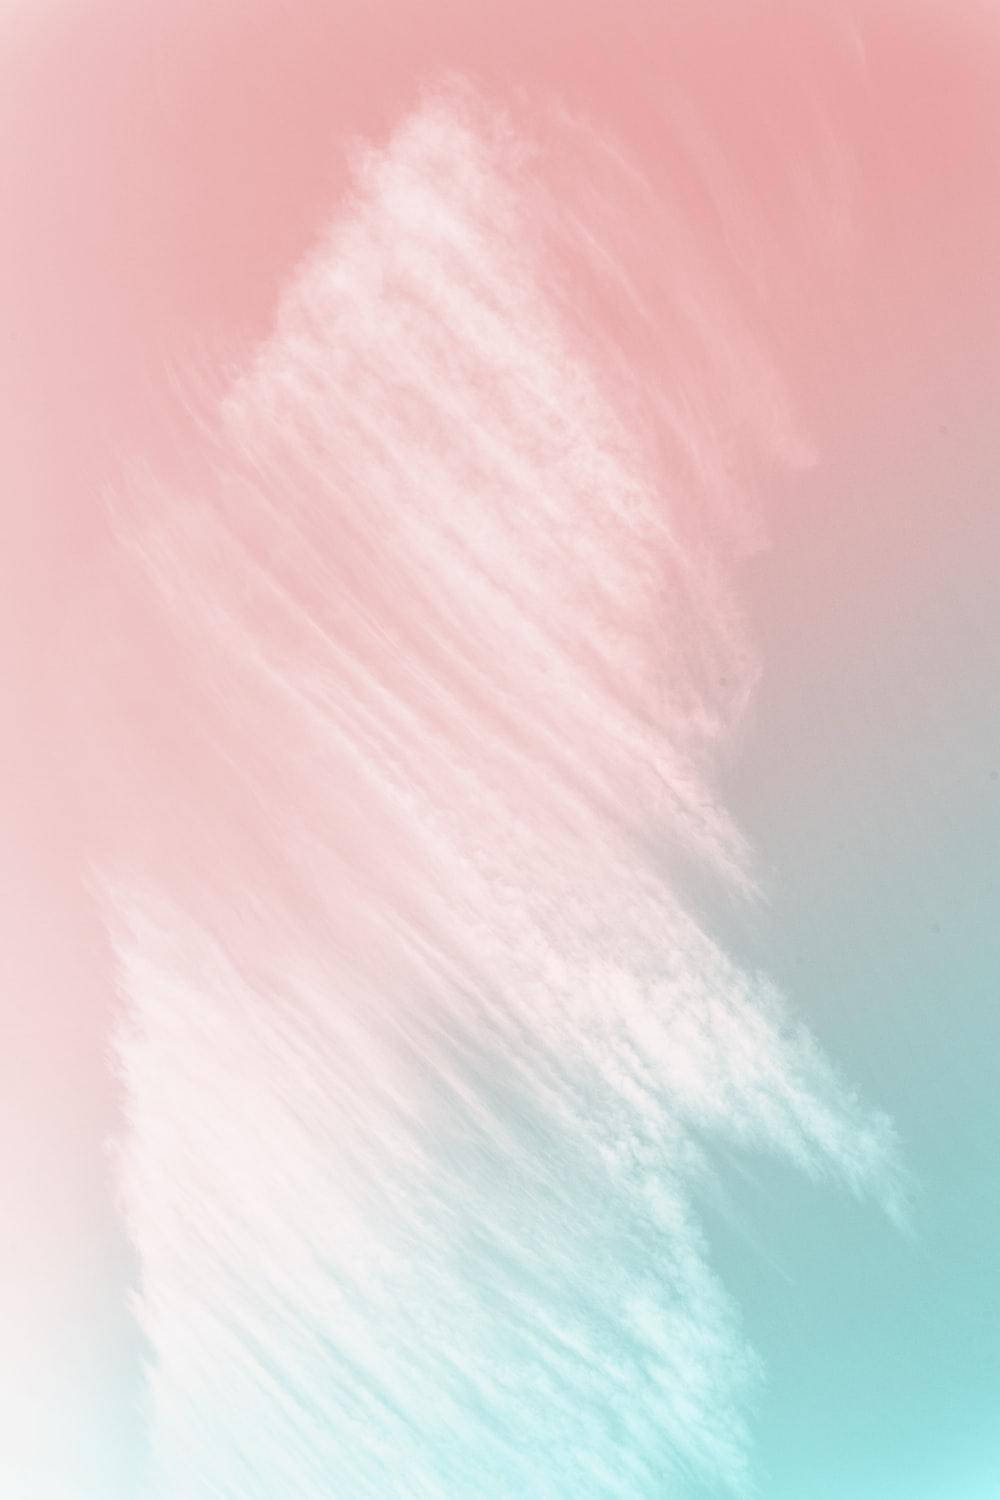 Iphone Pink Aesthetic Paint Strokes